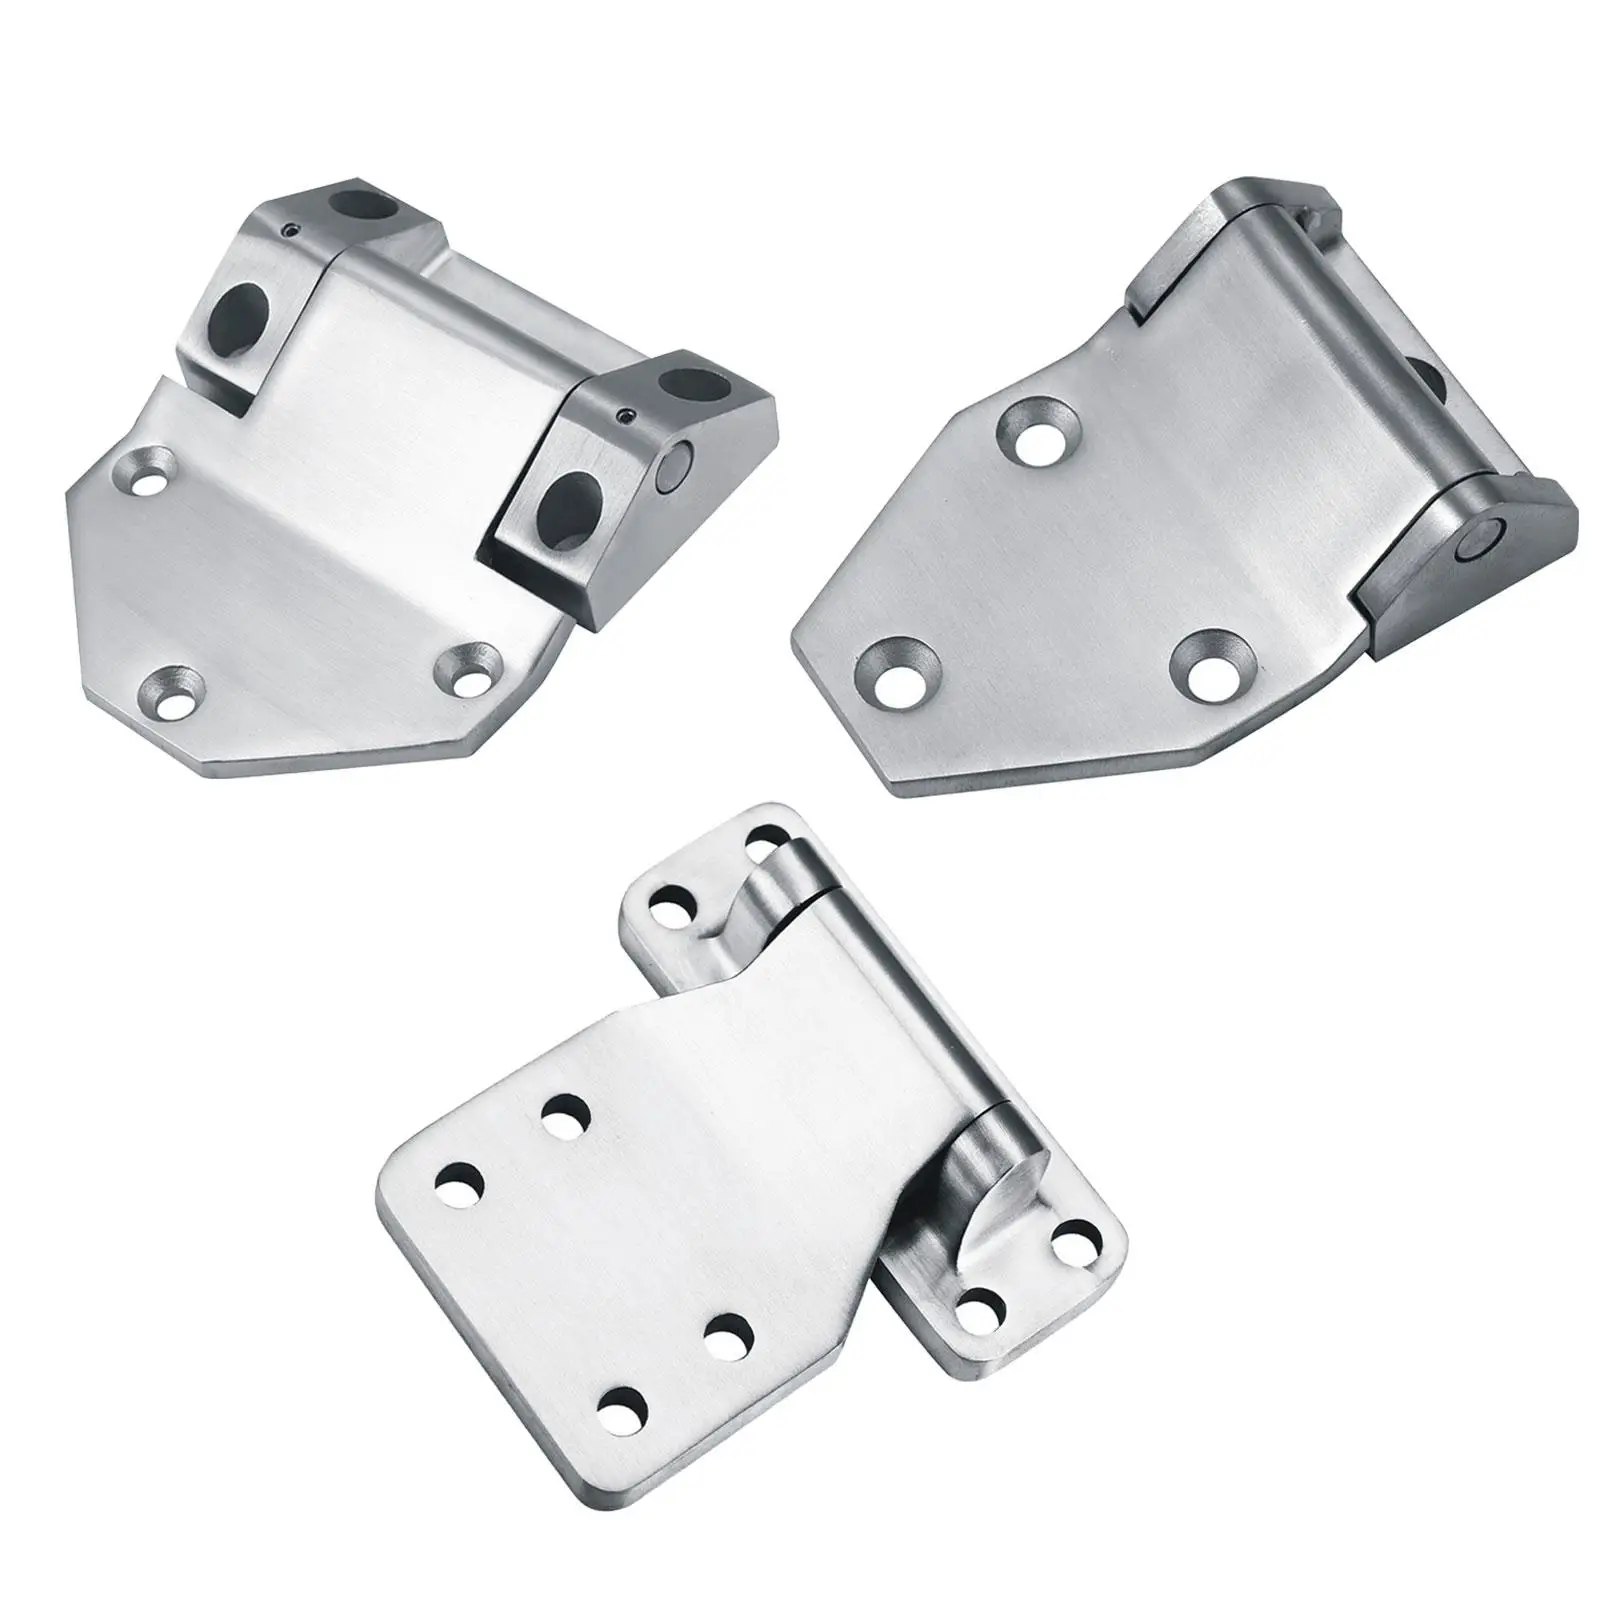 Steel Door Hinges Multi Function Replaces Shed Hinges for RV Window Barn